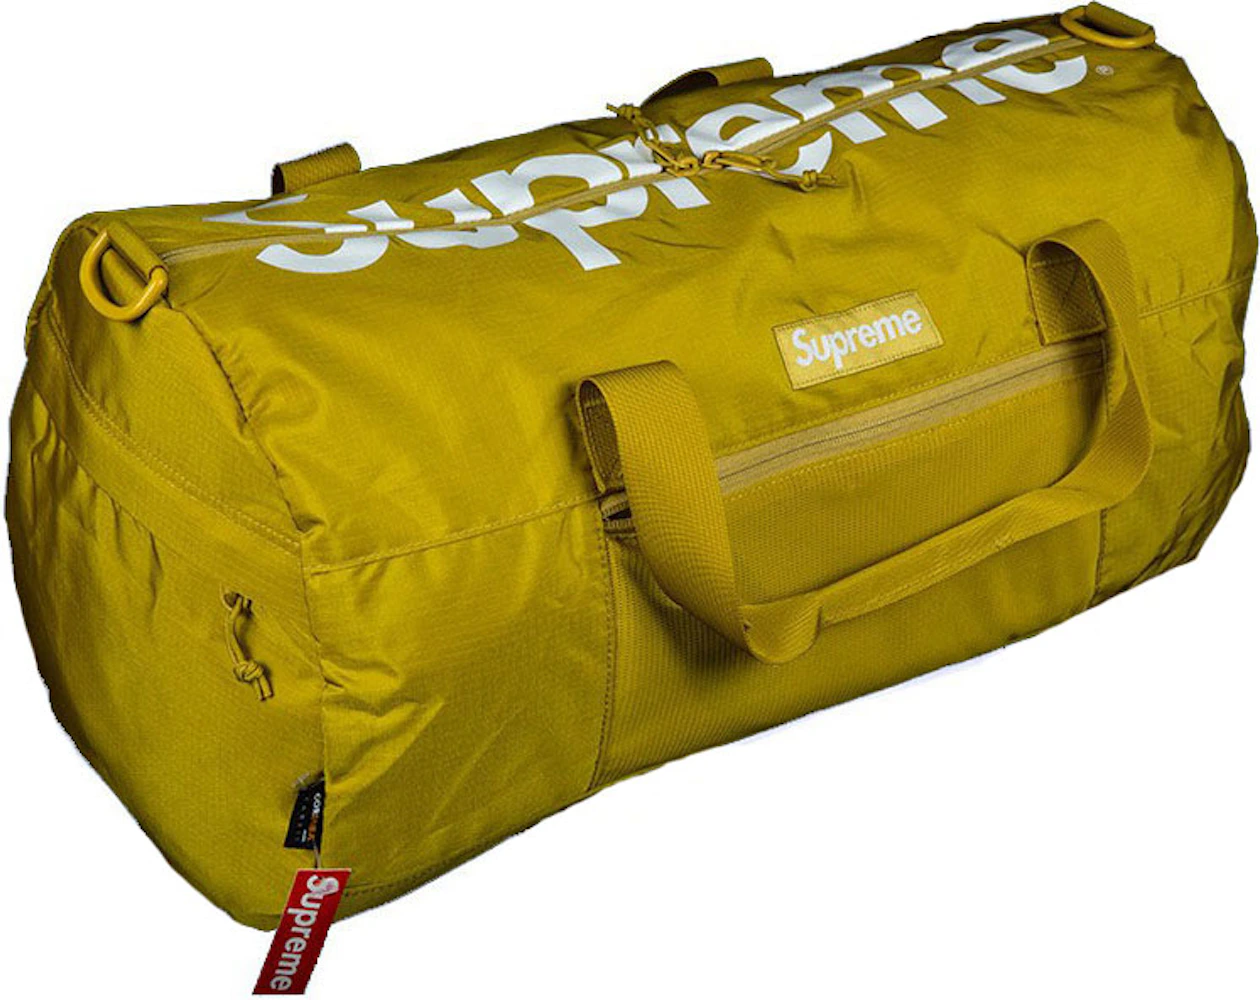 Supreme Duffel Bag SS17 for Sale in Mission Viejo, CA - OfferUp